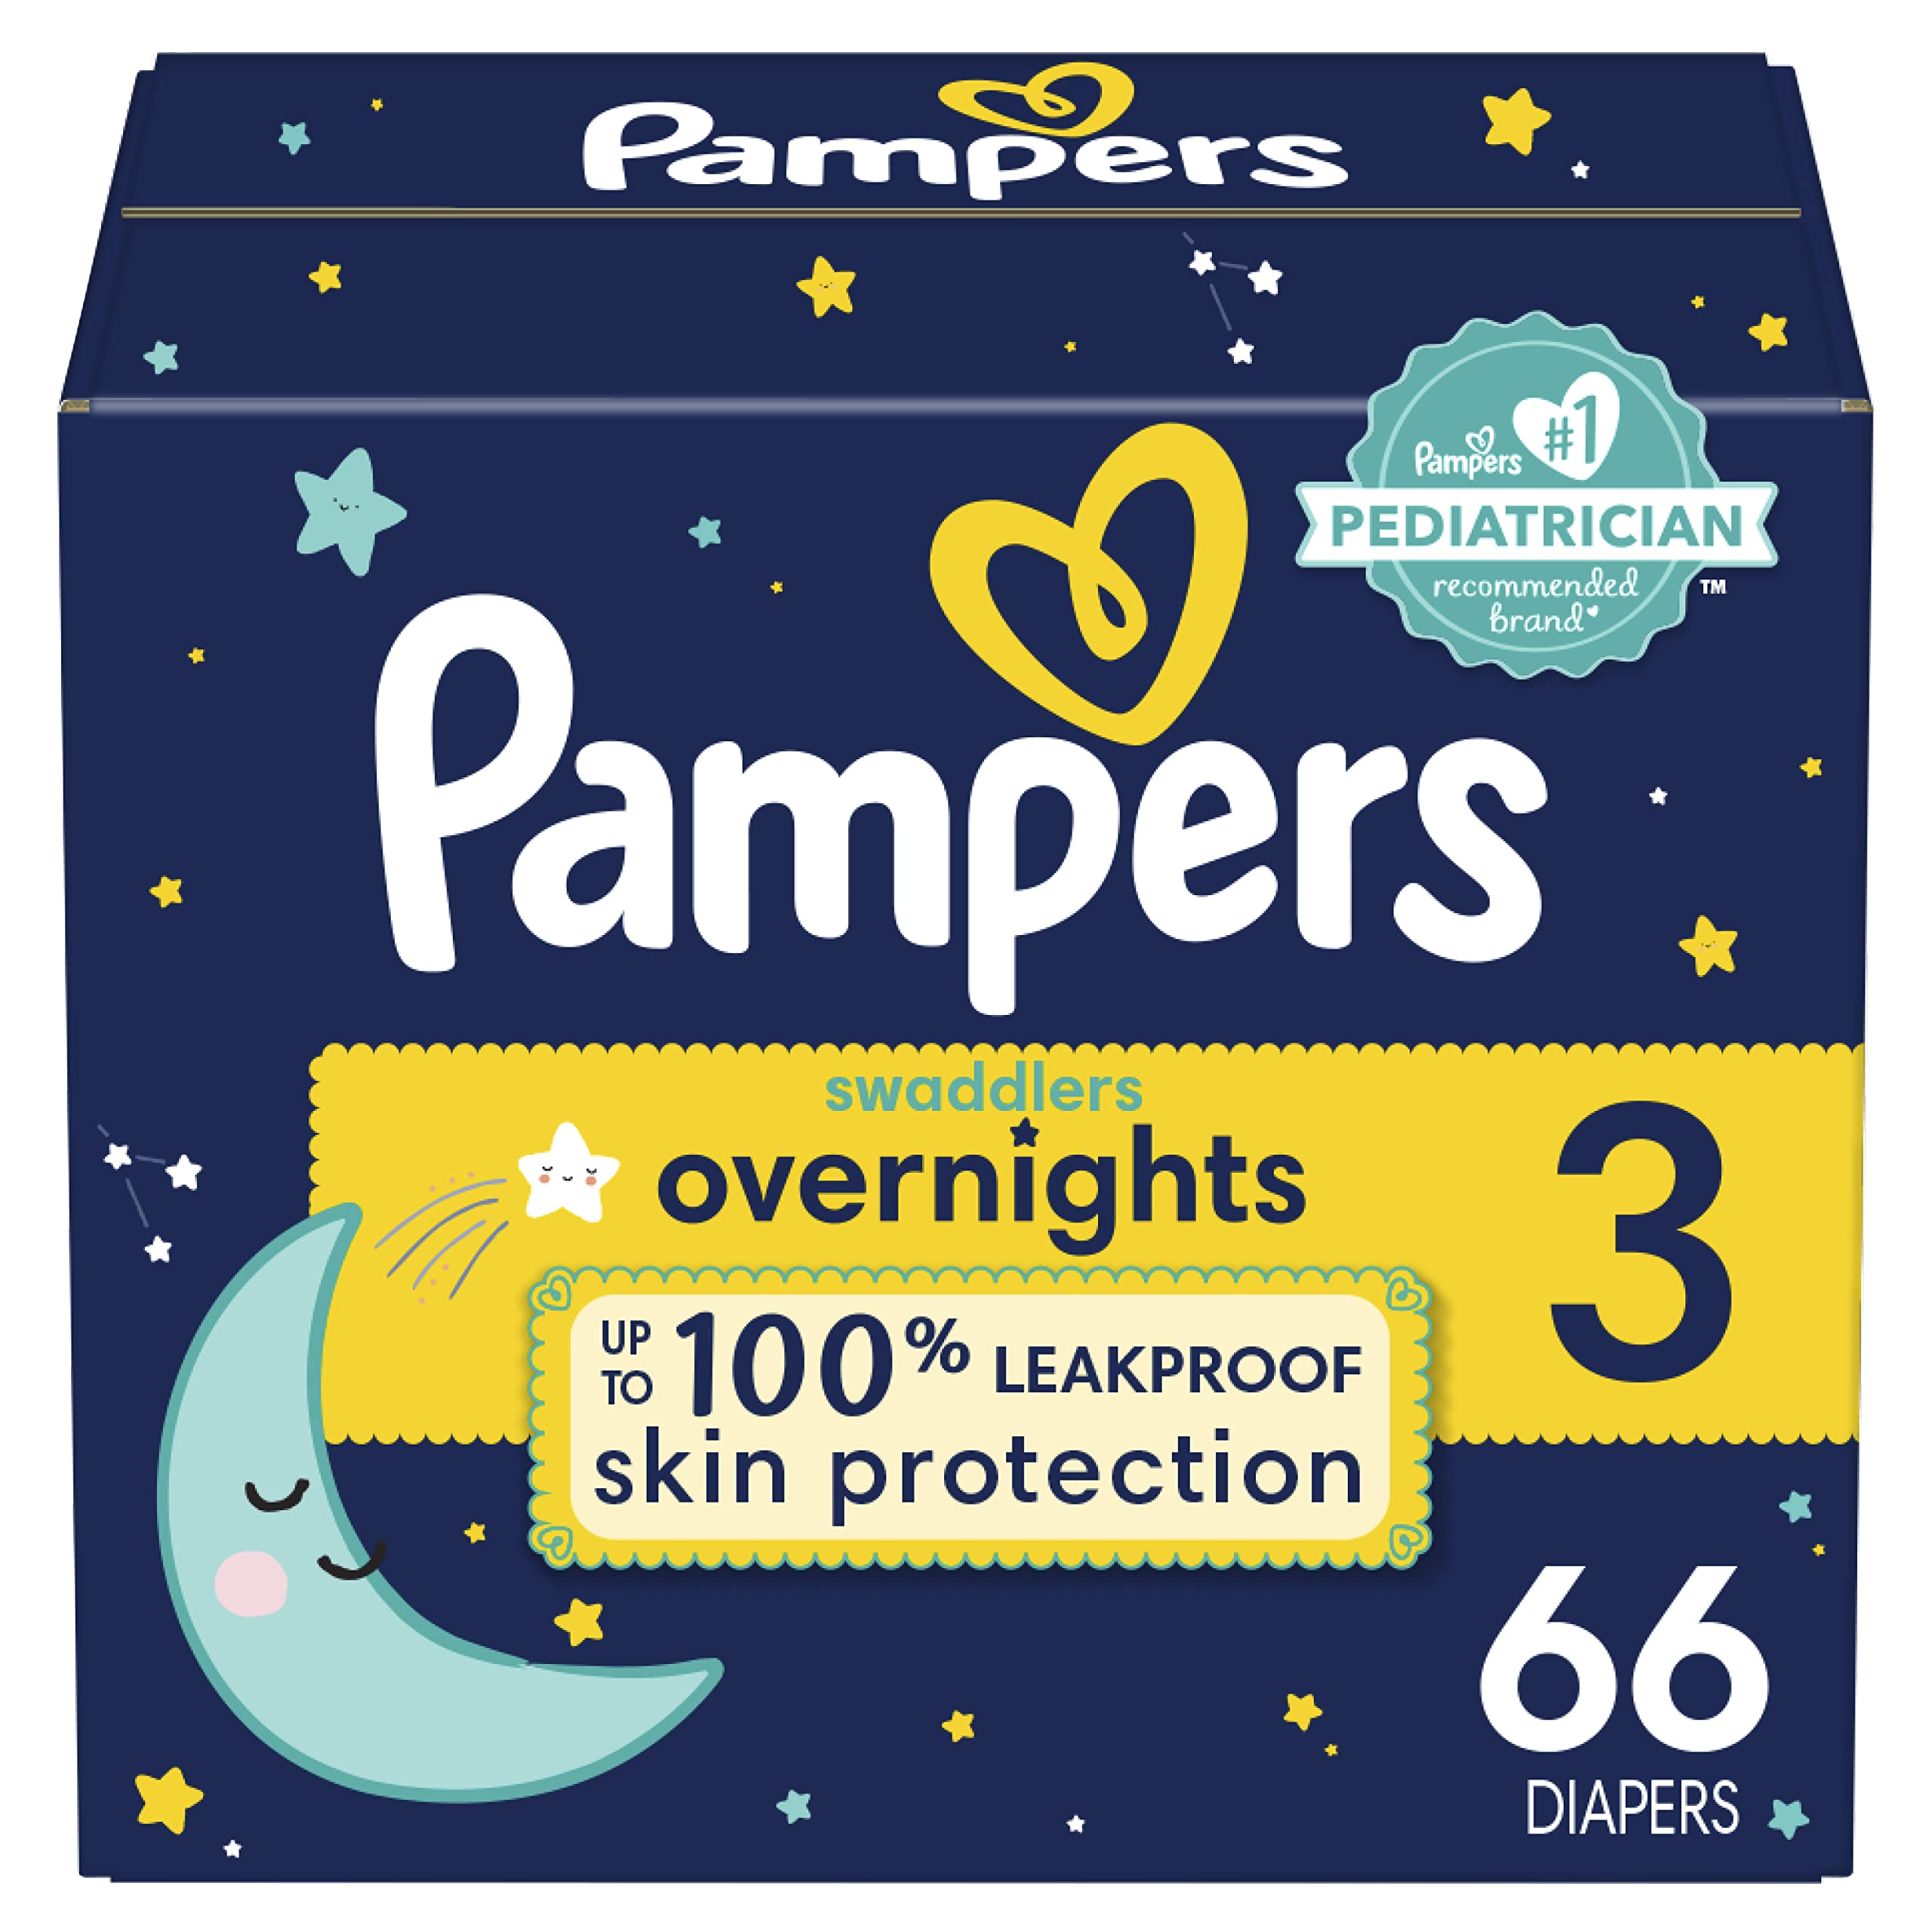 Diapers Size 3, 66 Count - Pampers Swaddlers Overnights Disposable Baby Diapers, Super Pack (Packaging & Prints May Vary)